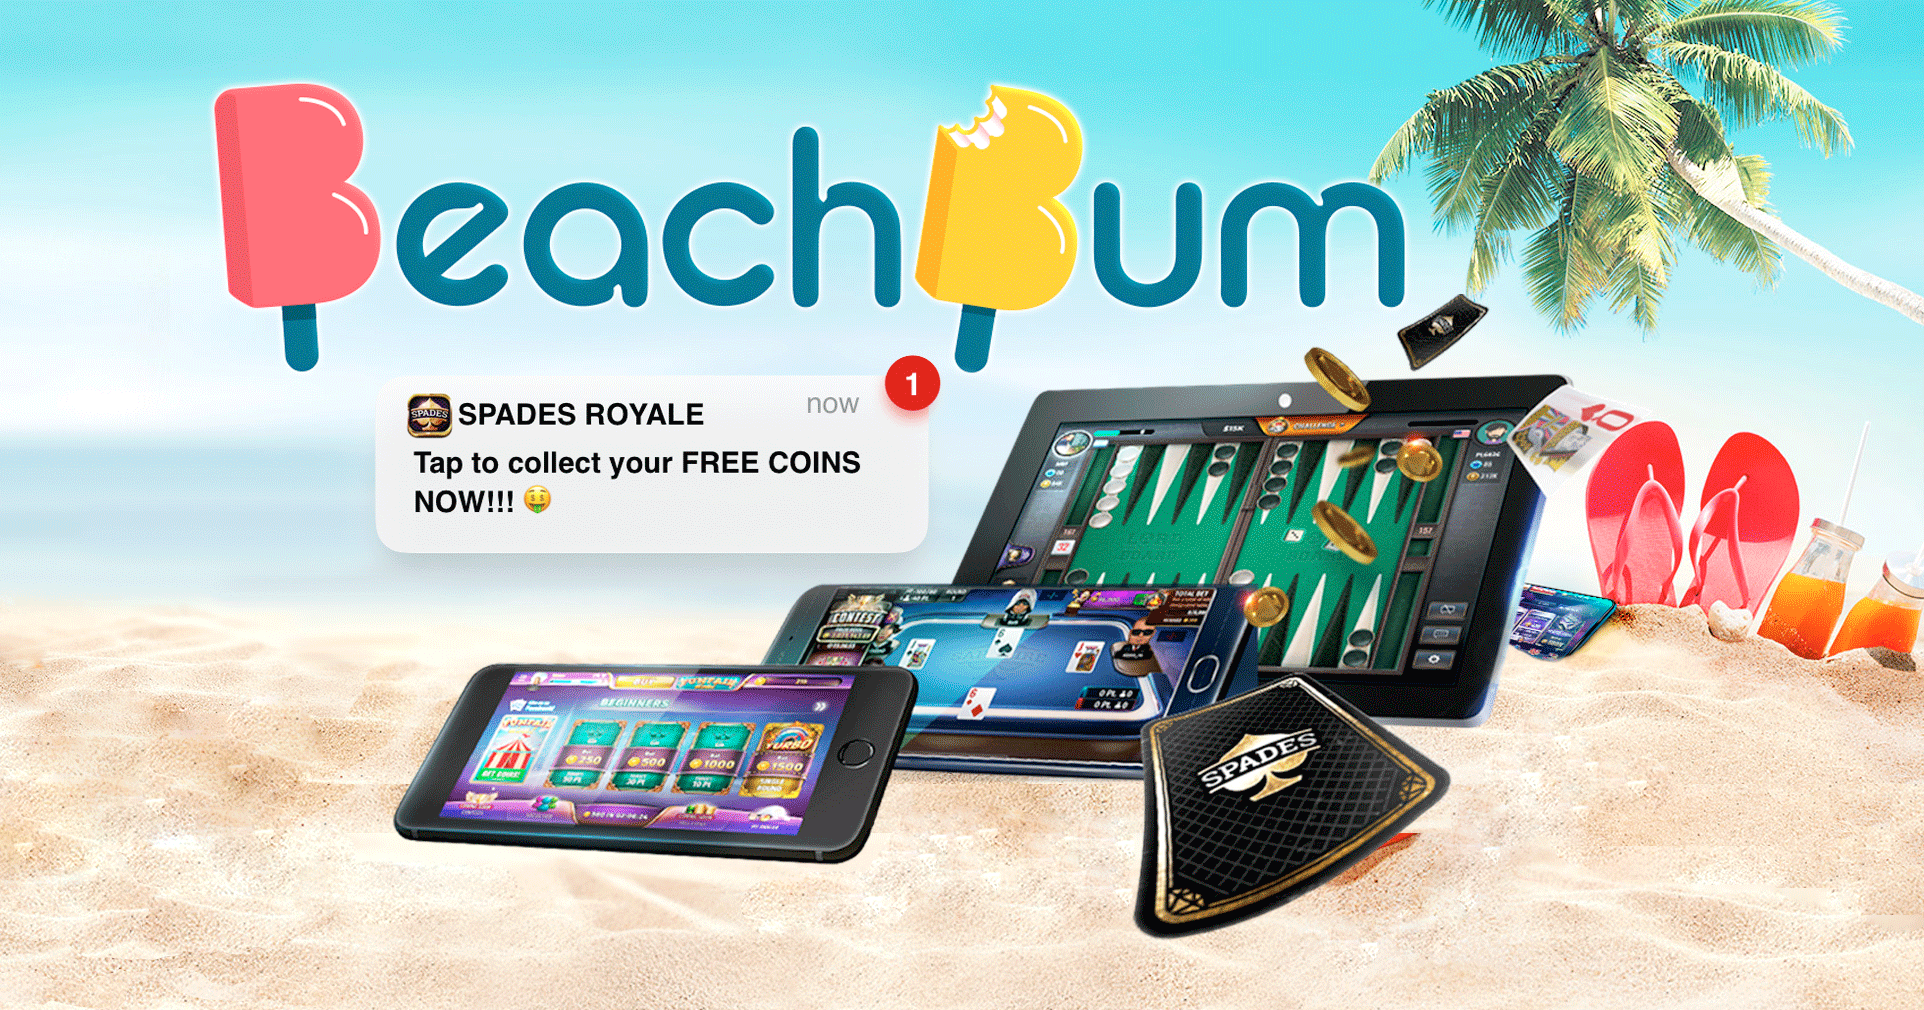 Beach Bum Re-Engages Gamers and Boosts In-App Purchases